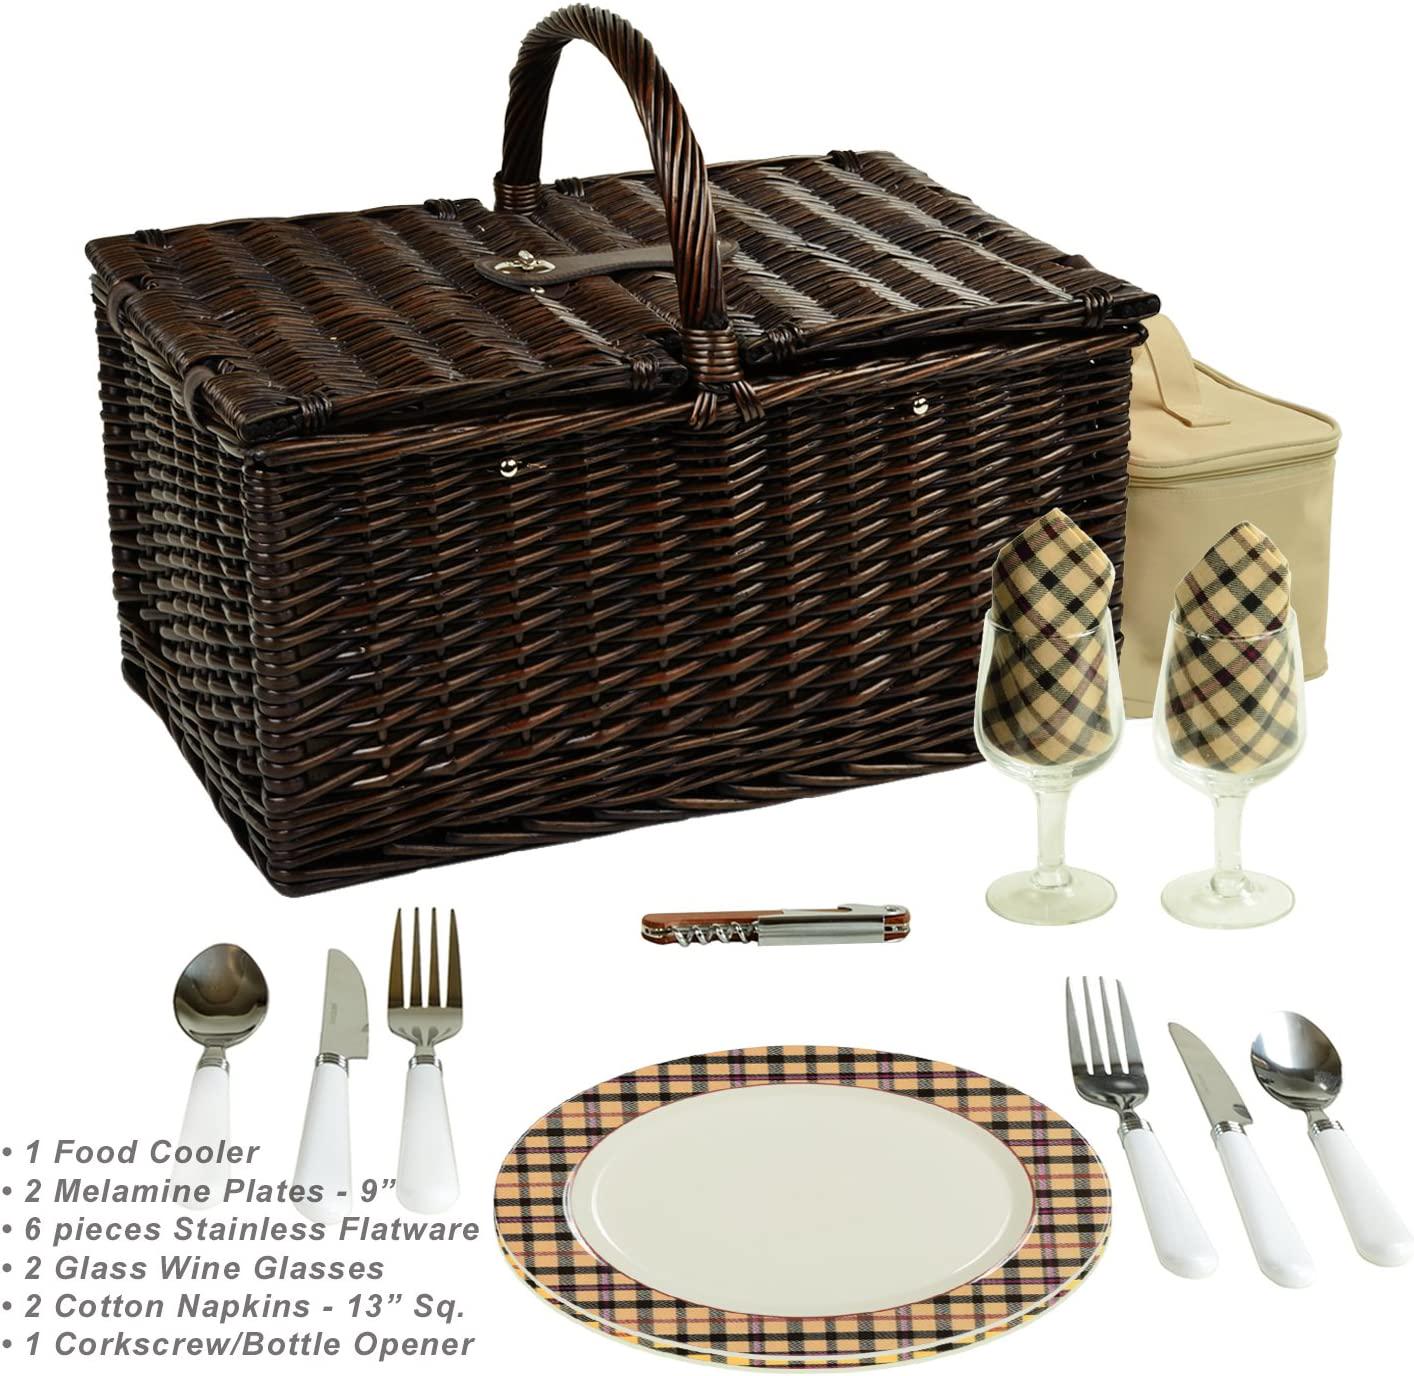 Picnic at Ascot Surrey Willow Picnic Basket with Service for 2 - London Plaid